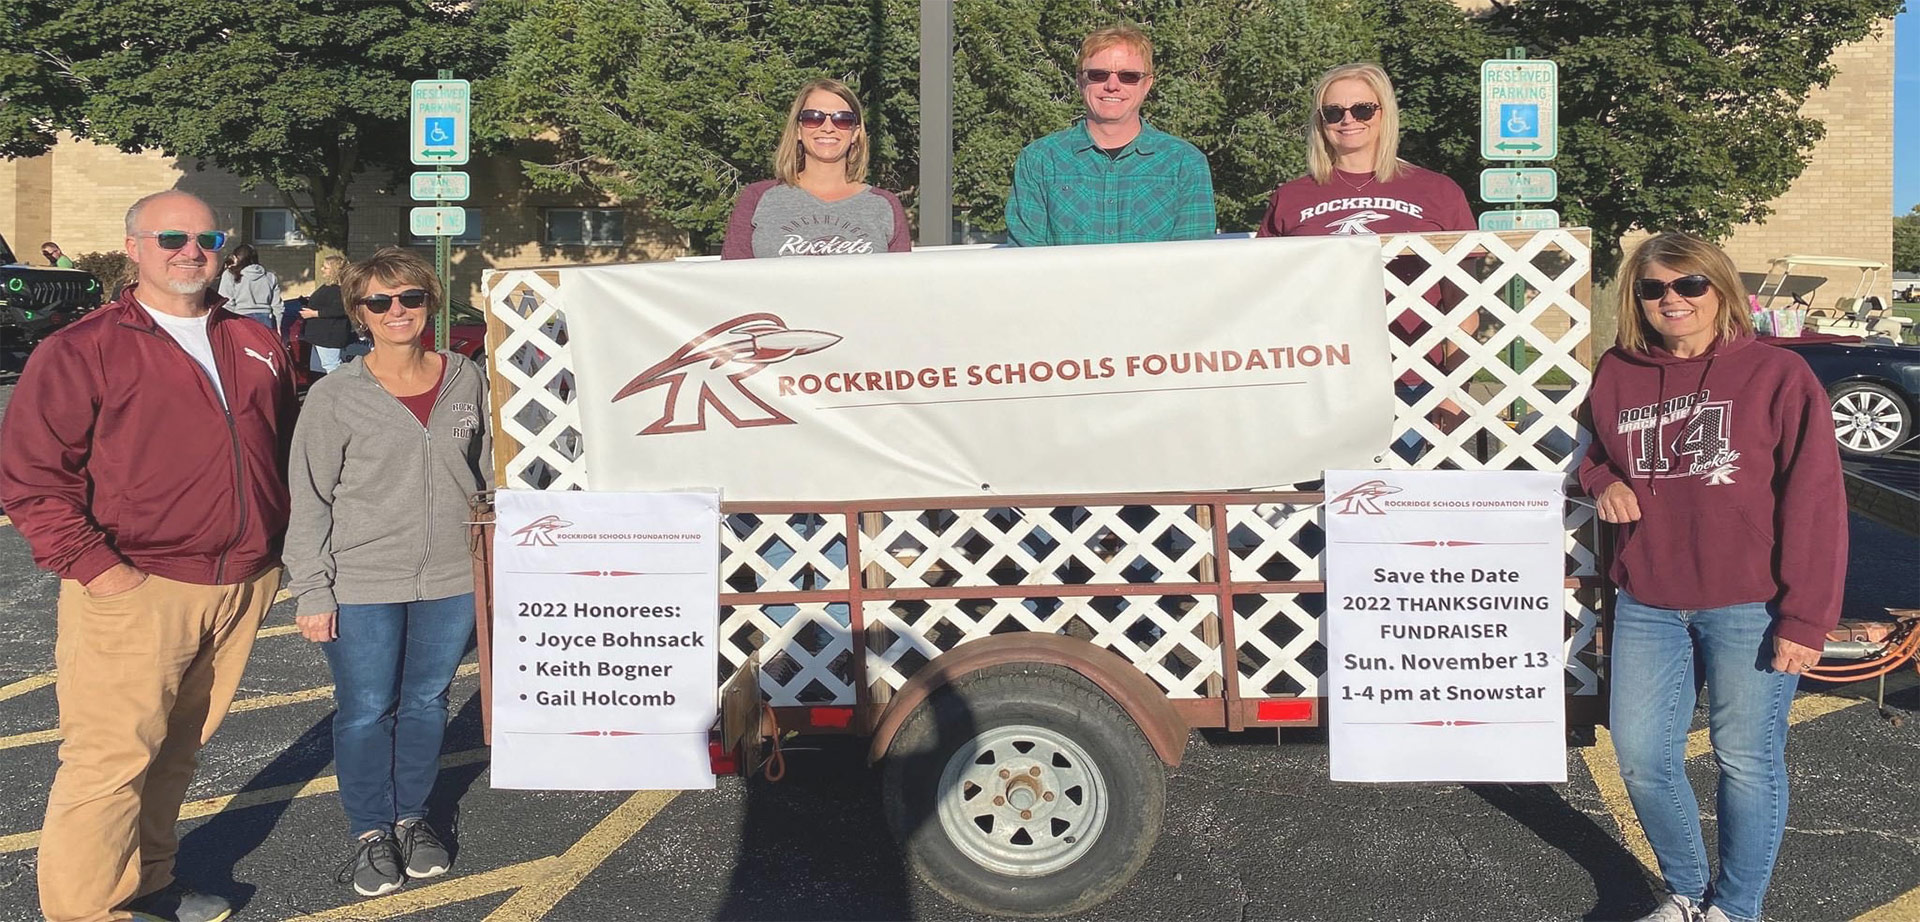 Representatives of the Rockridge Schools Foundation stand in a parade float. Several other representatives stand to each side of the float. The parade float has signs recognizing 2022 honorees and advertising an event